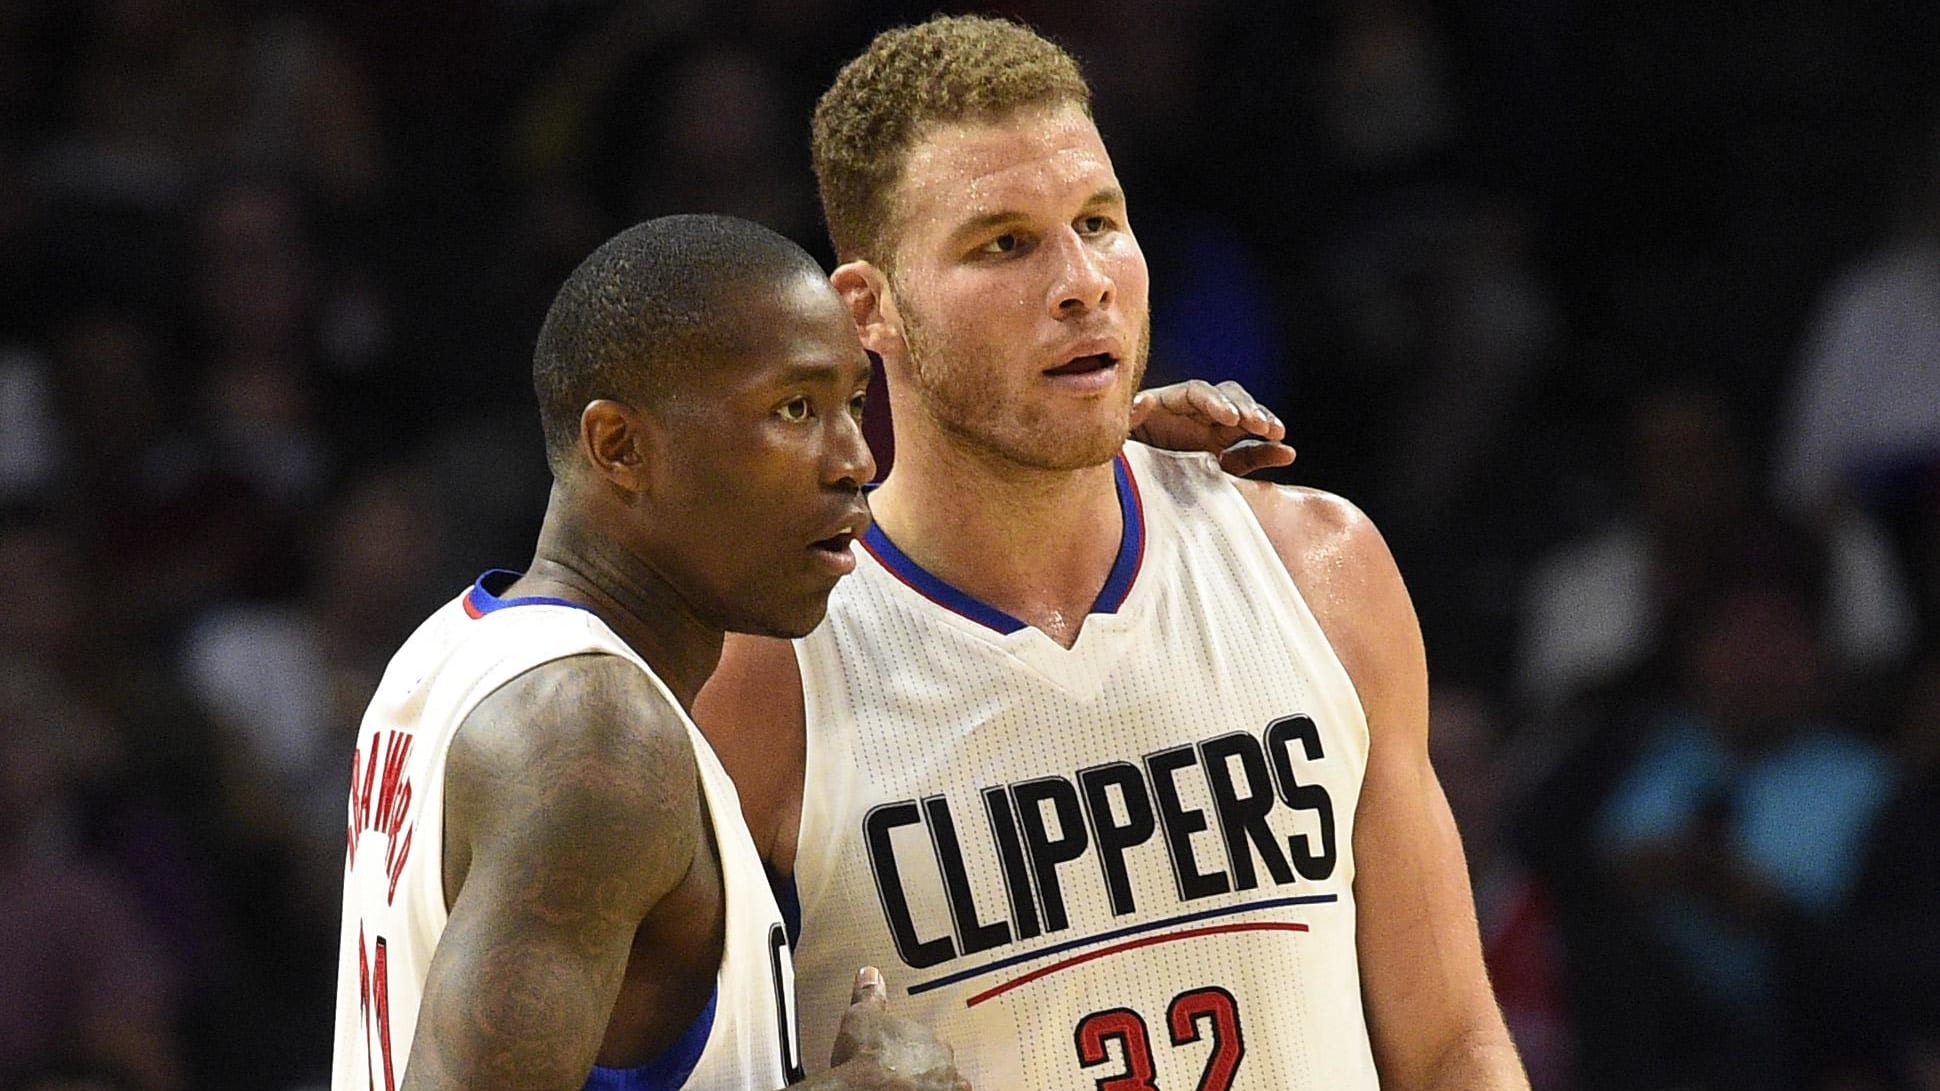 Jamal Crawford’s Viral Post On X After Blake Griffin Retires From NBA